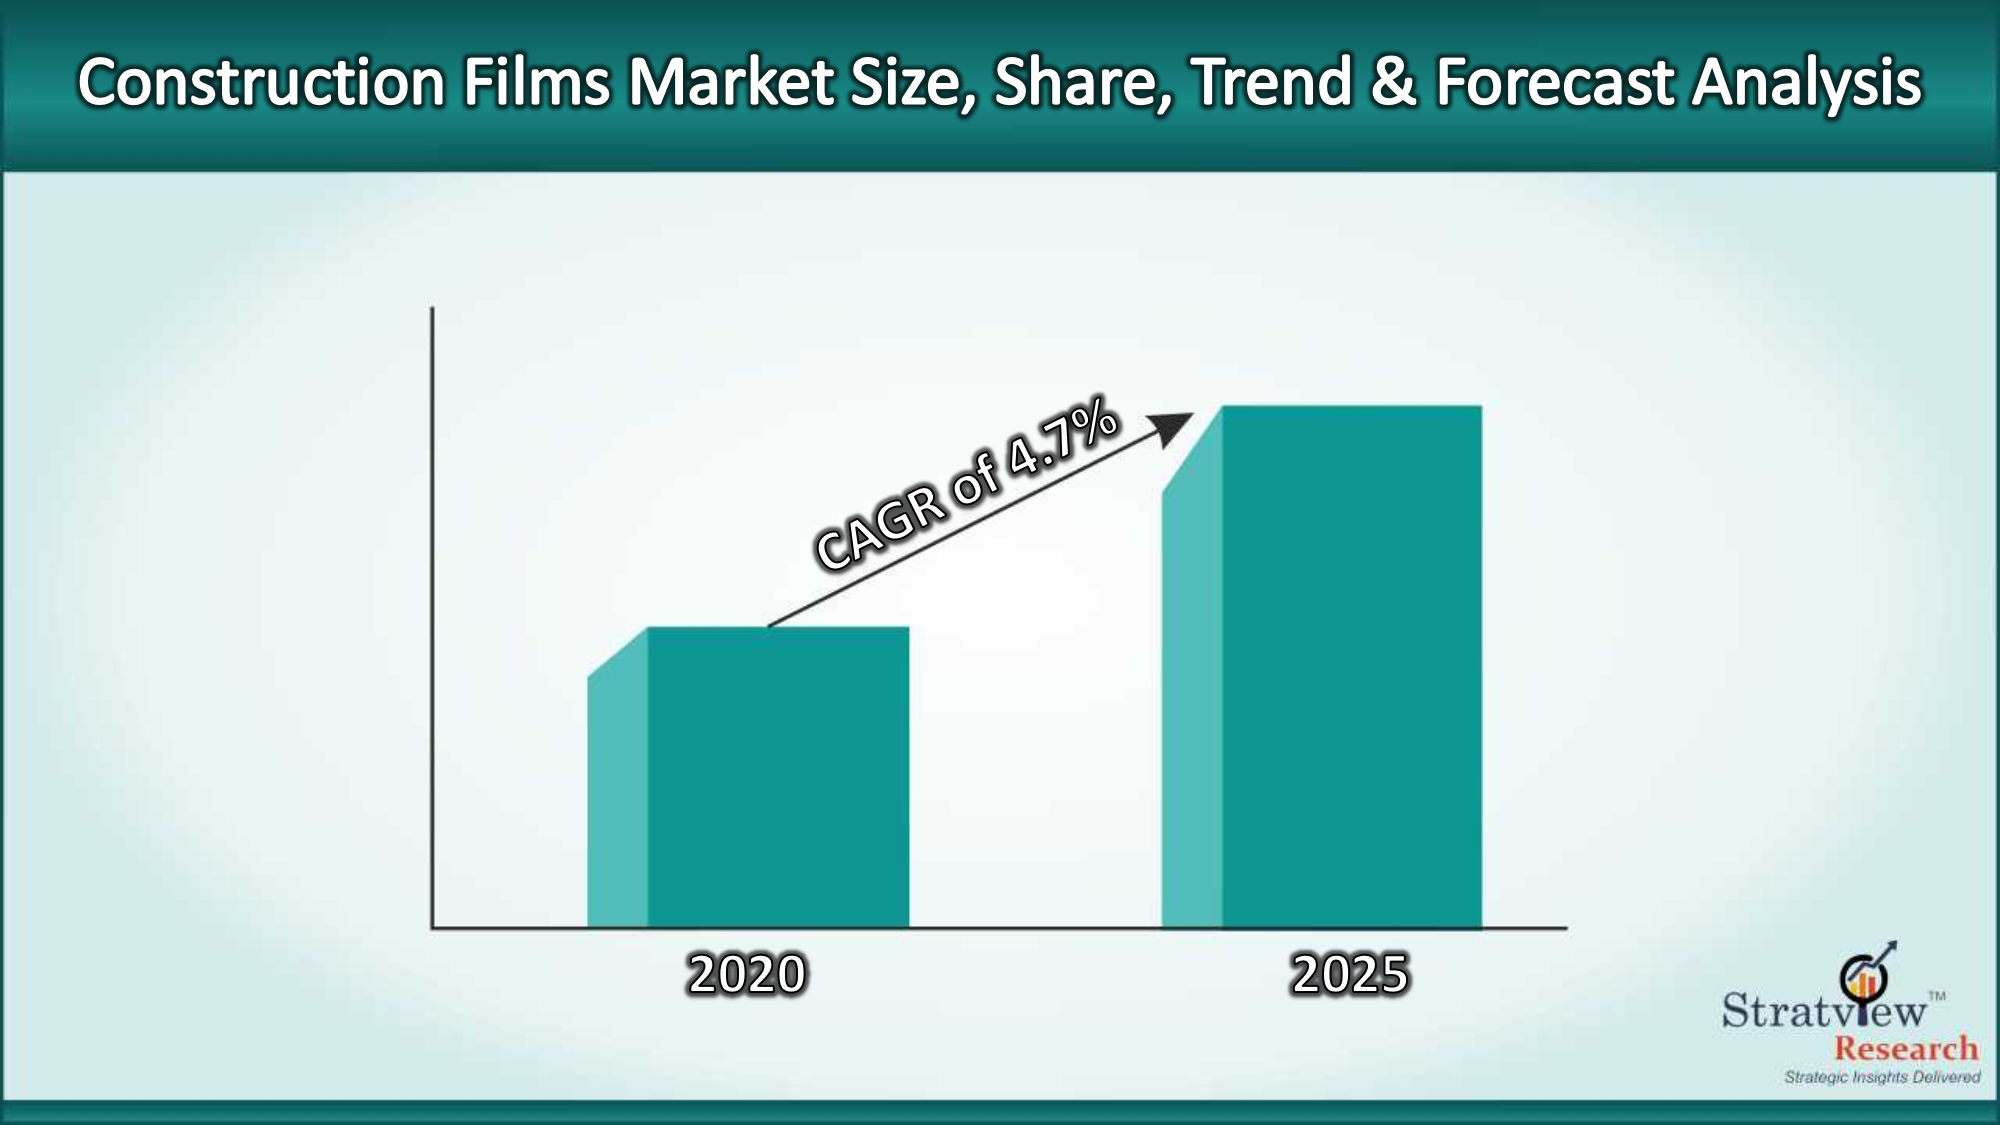 Construction Films Market to offer profitable growth during 2020-25 with a healthy CAGR of 5.2%